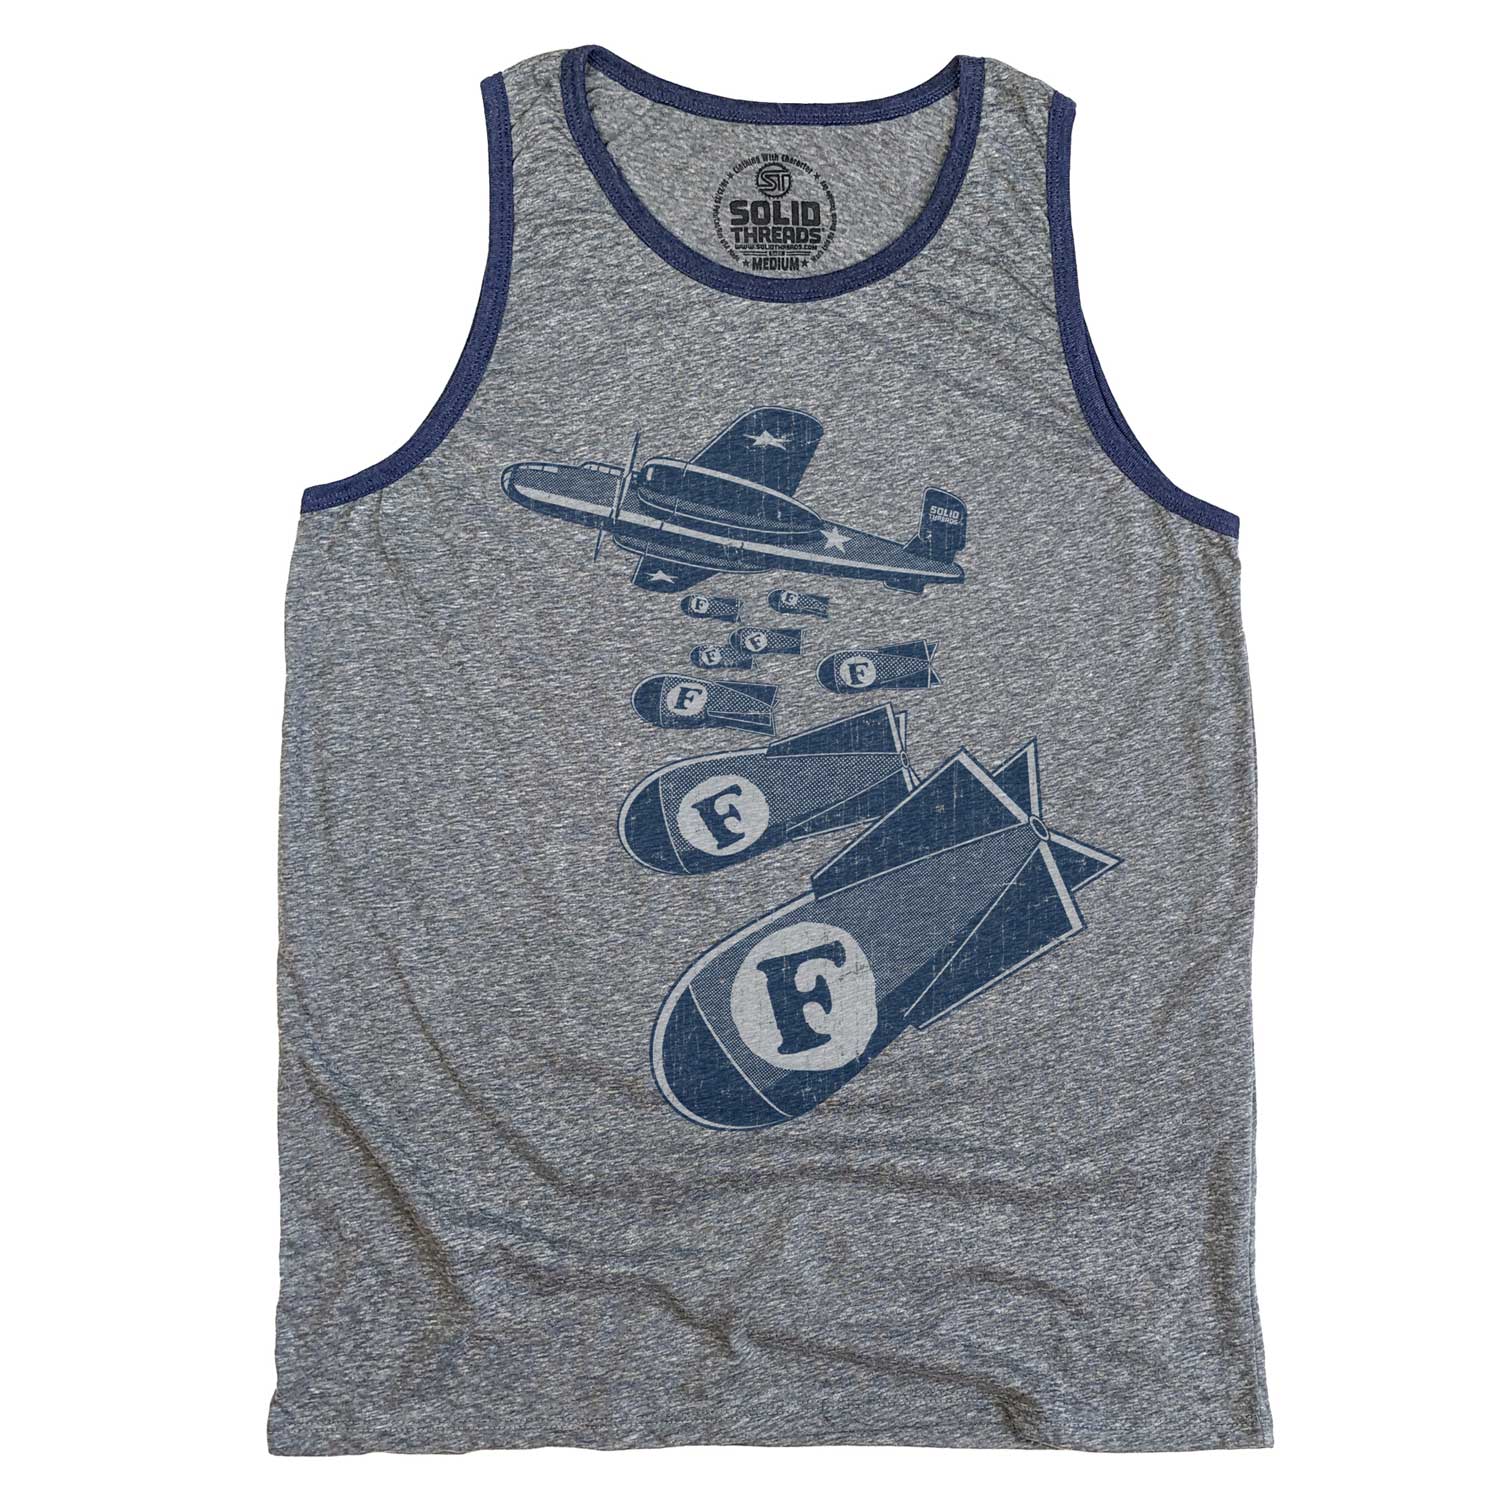 Men's F-Bombs Vintage Graphic Tank Top | Funny Swearing T-shirt | Solid Threads